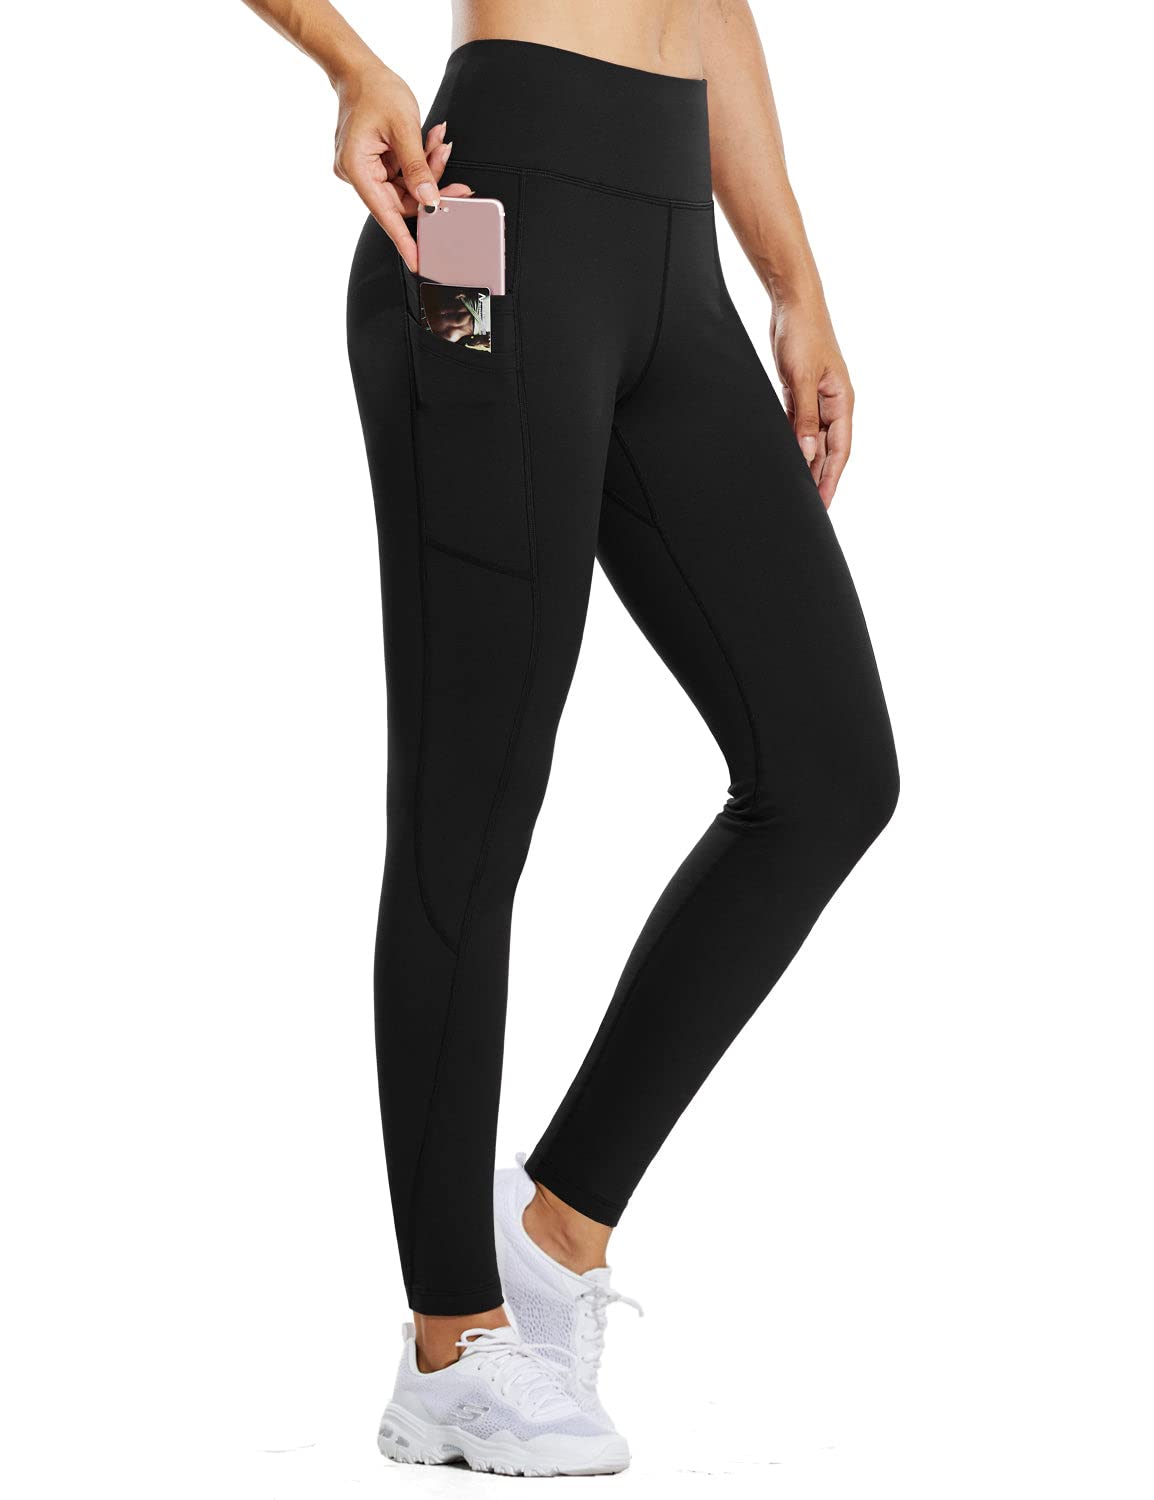  Women's Fleece Lined Leggings Thermal High Waist Tummy Control  Yoga Pants Winter Slimming Workout Running Tights Black : Clothing, Shoes &  Jewelry